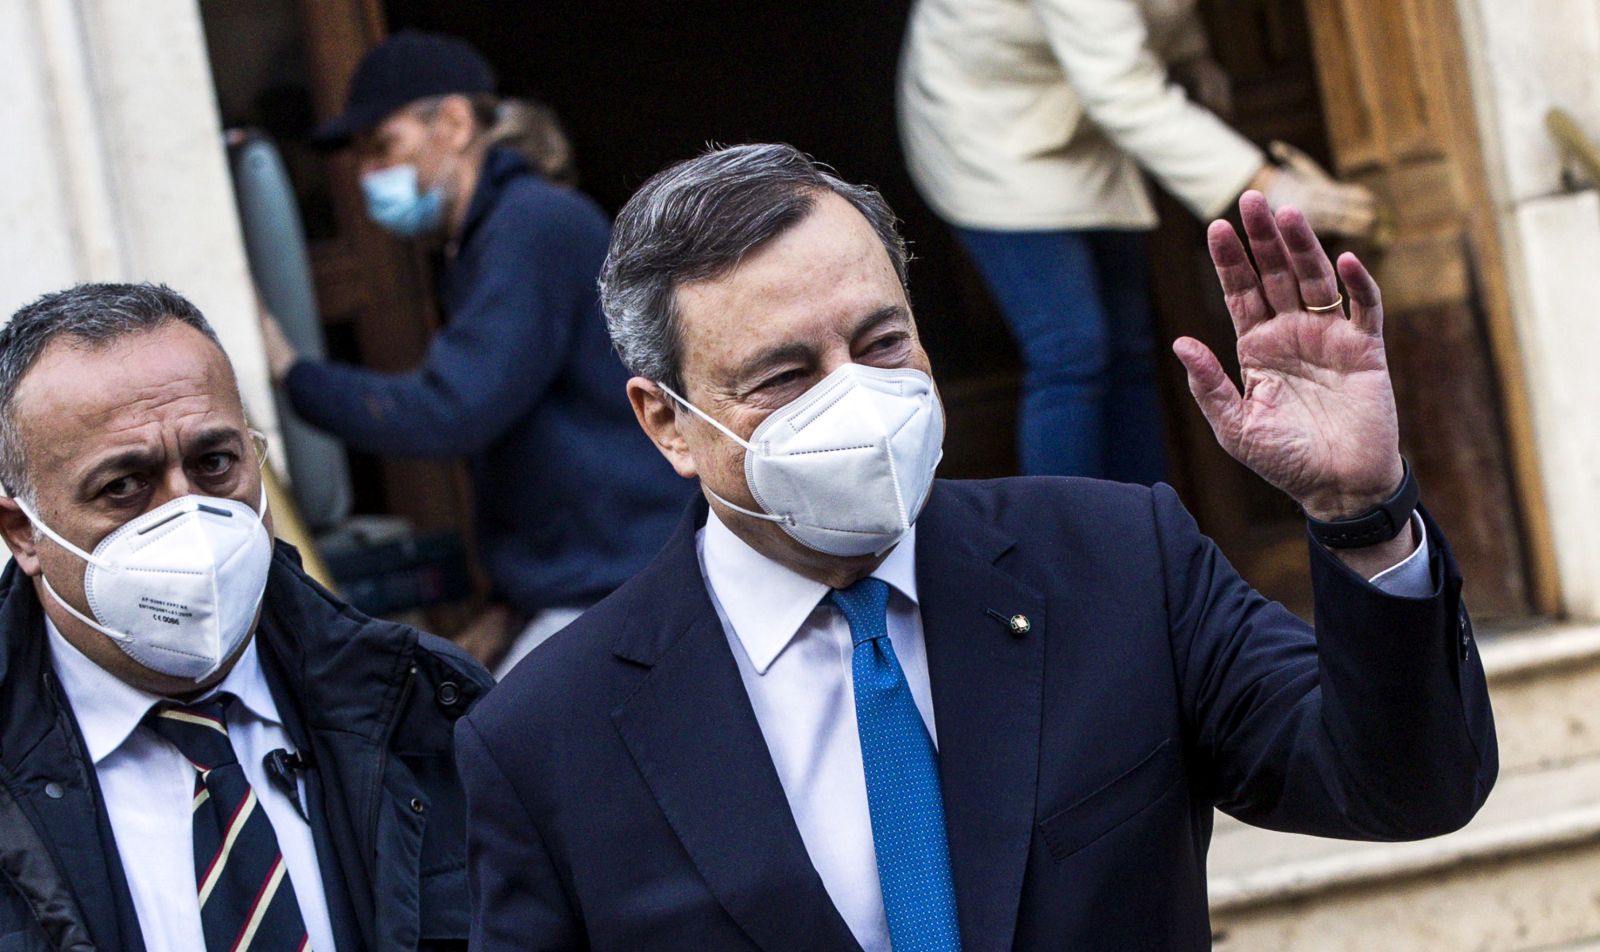 epa08986904 Italian designated-prime minister Mario Draghi (C) leaves his home in Rome, Italy, 04 February 2021. Draghi accepted on 03 February a mandate from the Italian president to form a national unity government after the previous coalition collapsed.  EPA/ANGELO CARCONI